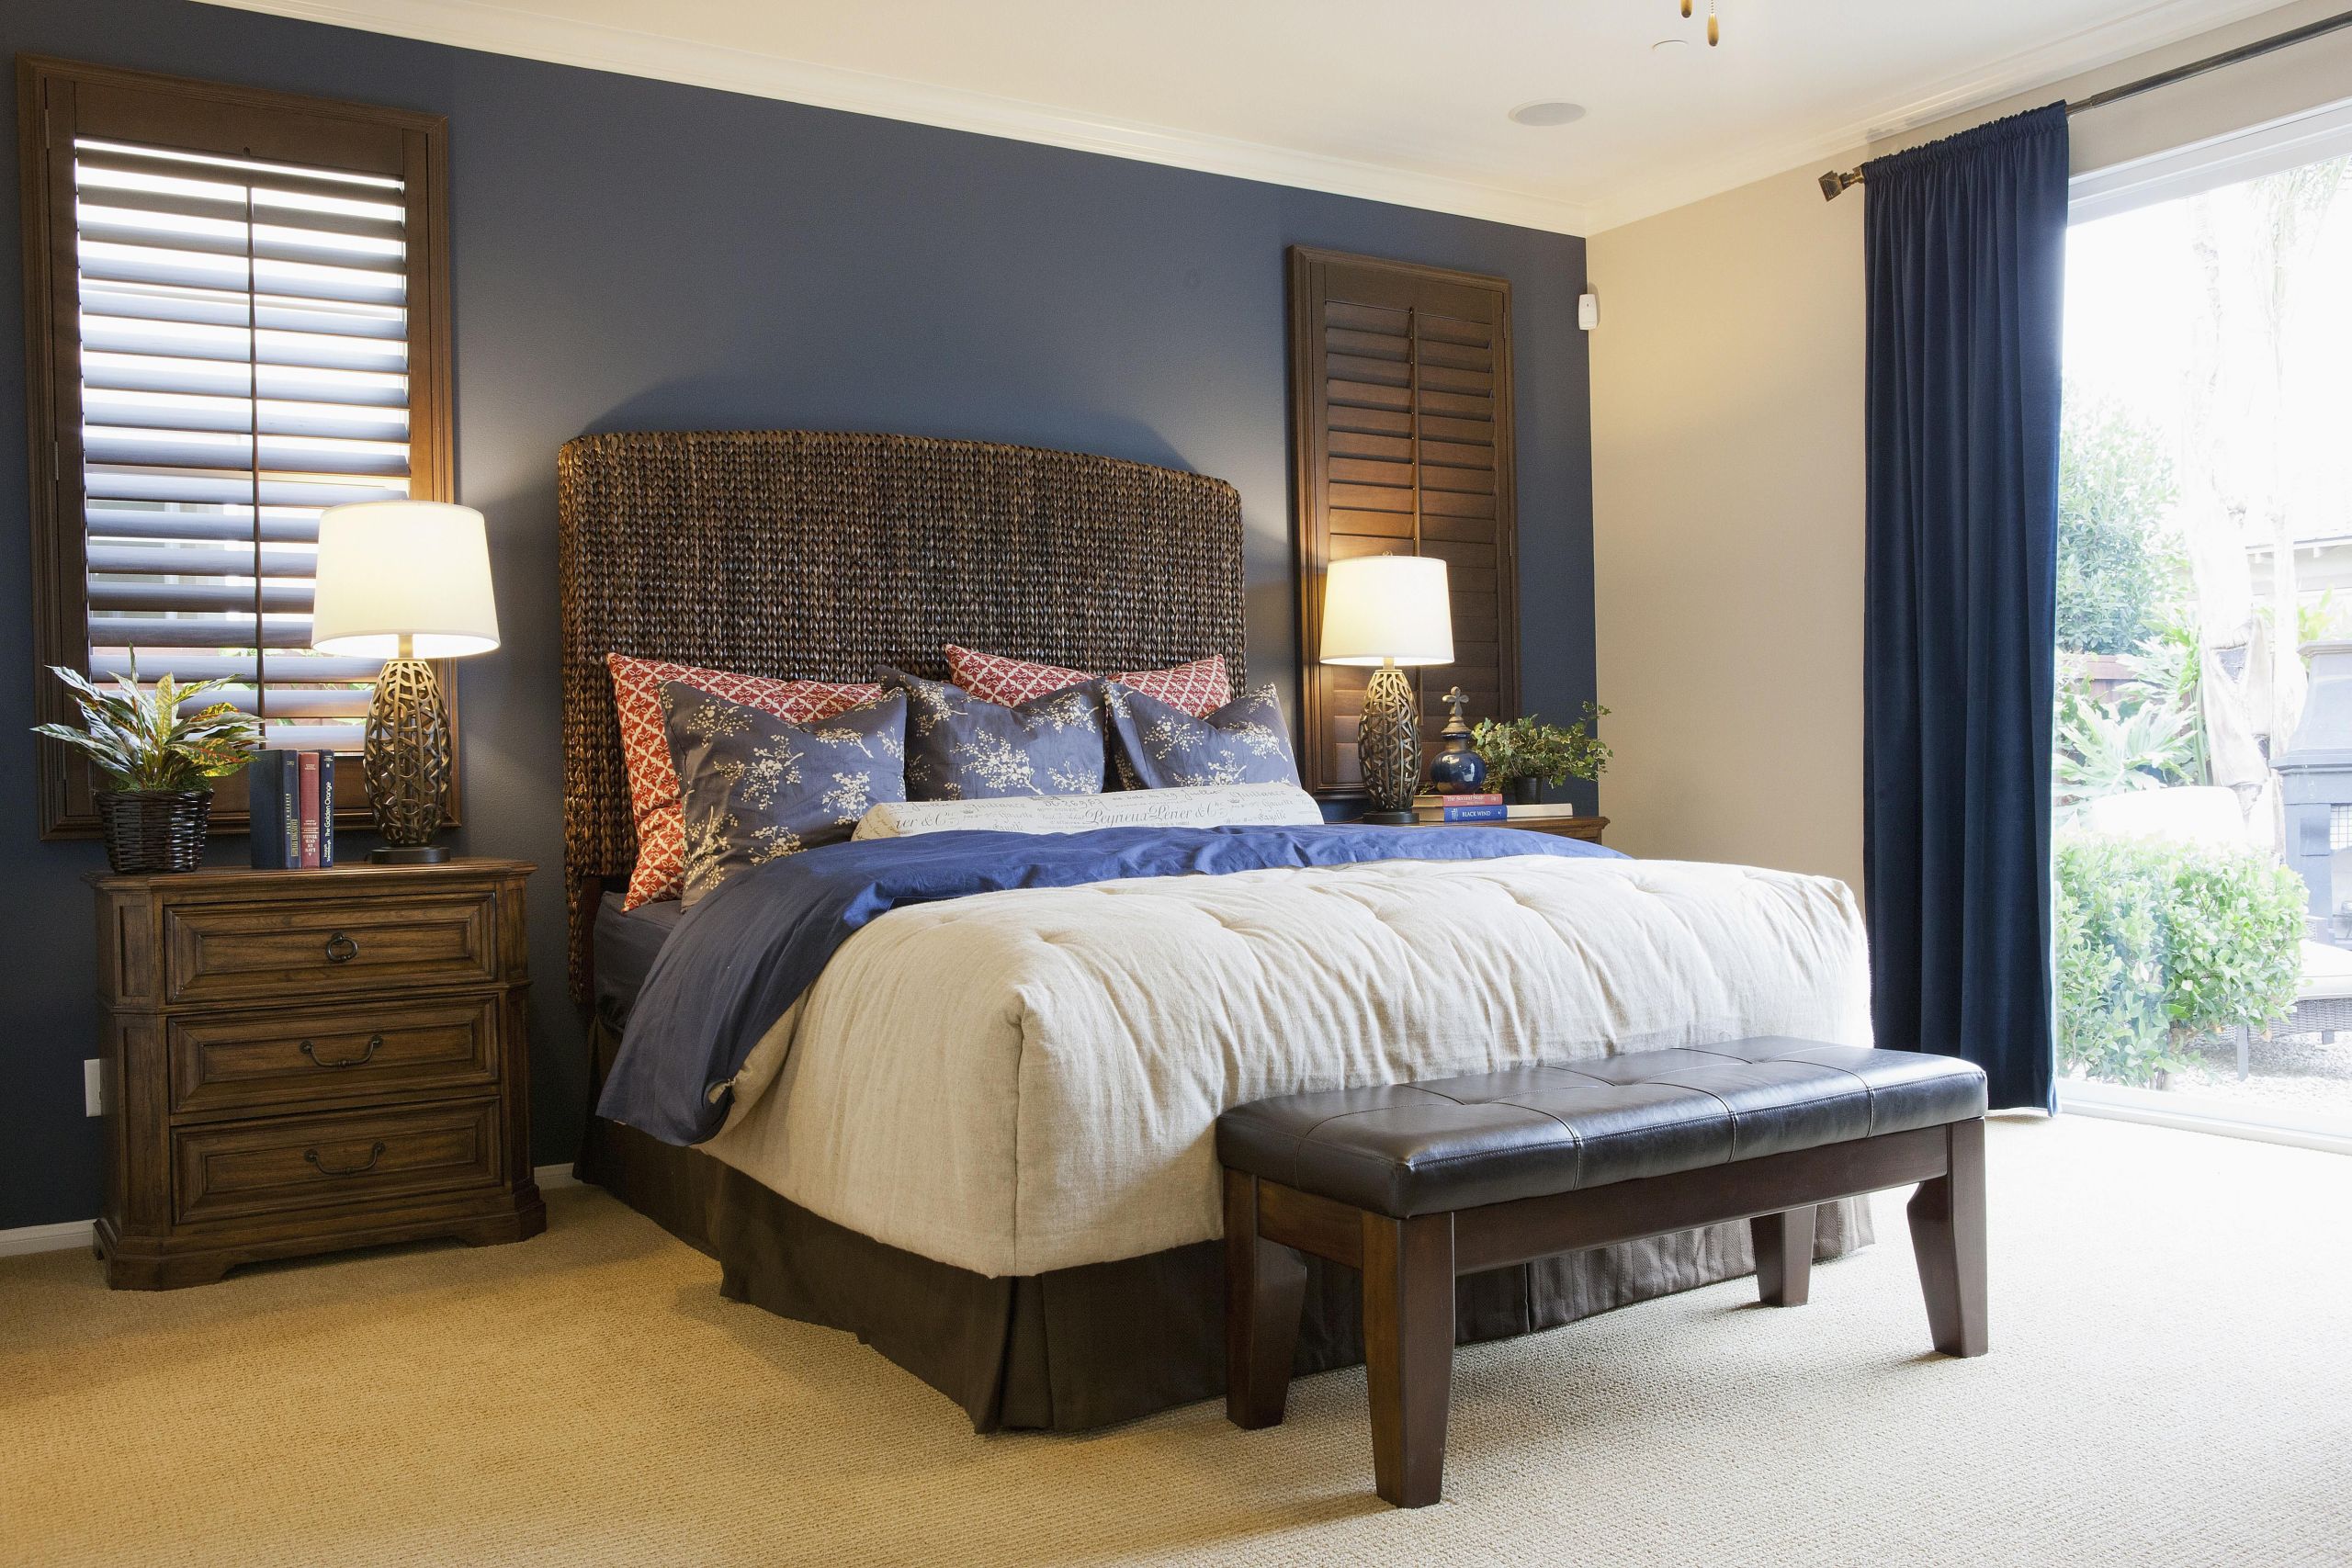 Accent Wall Small Bedroom
 How to Choose an Accent Wall and Color in a Bedroom